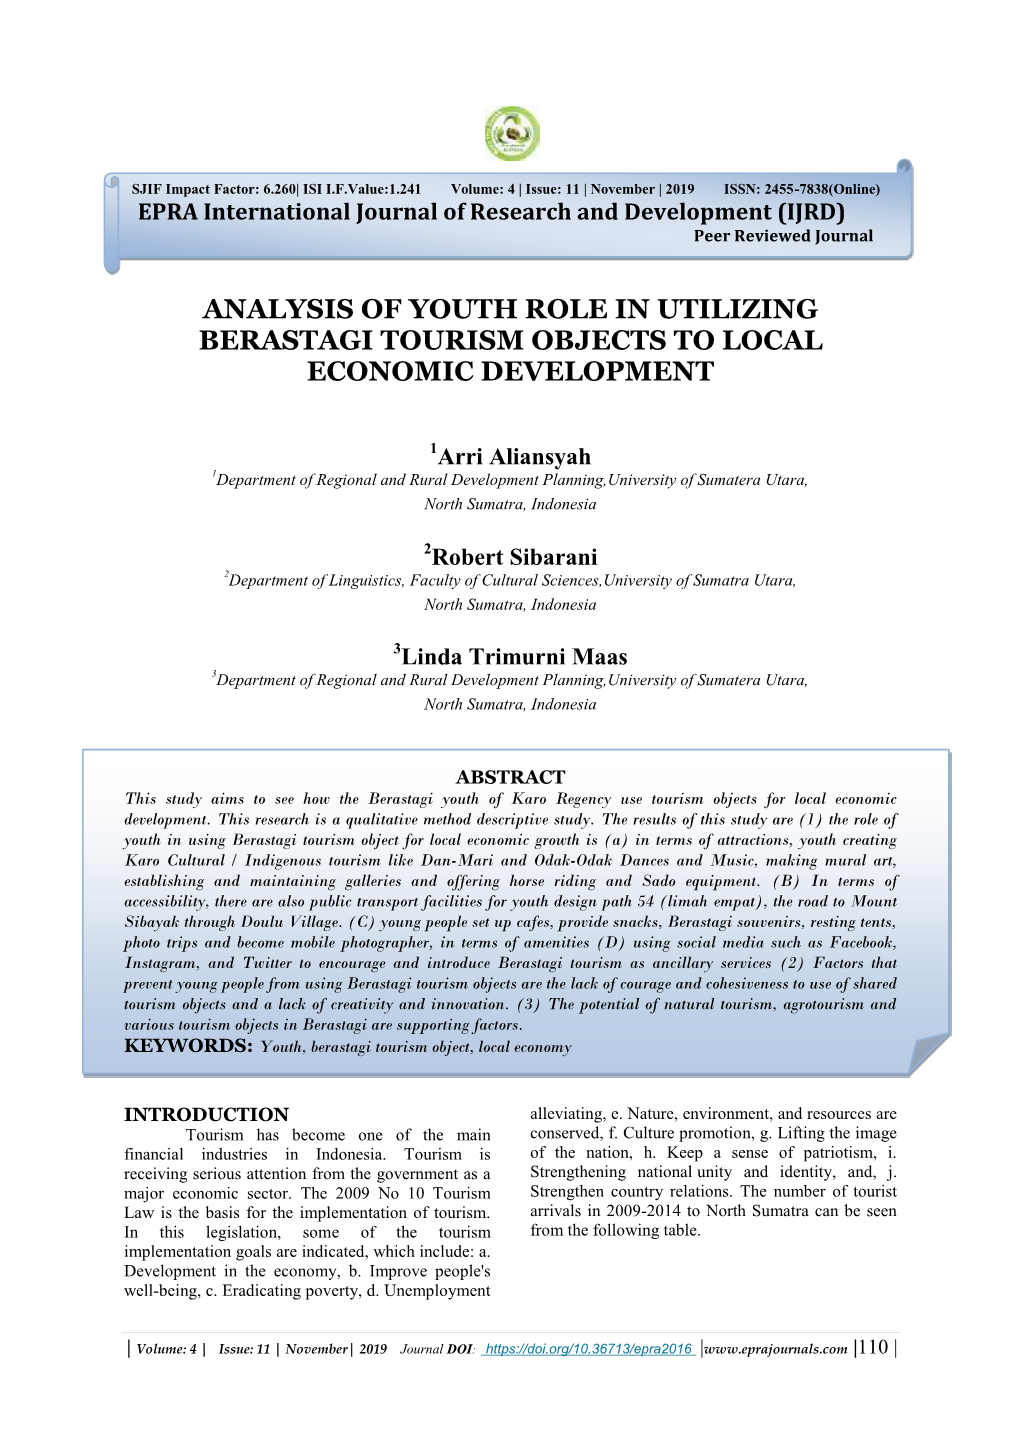 Analysis of Youth Role in Utilizing Berastagi Tourism Objects to Local Economic Development